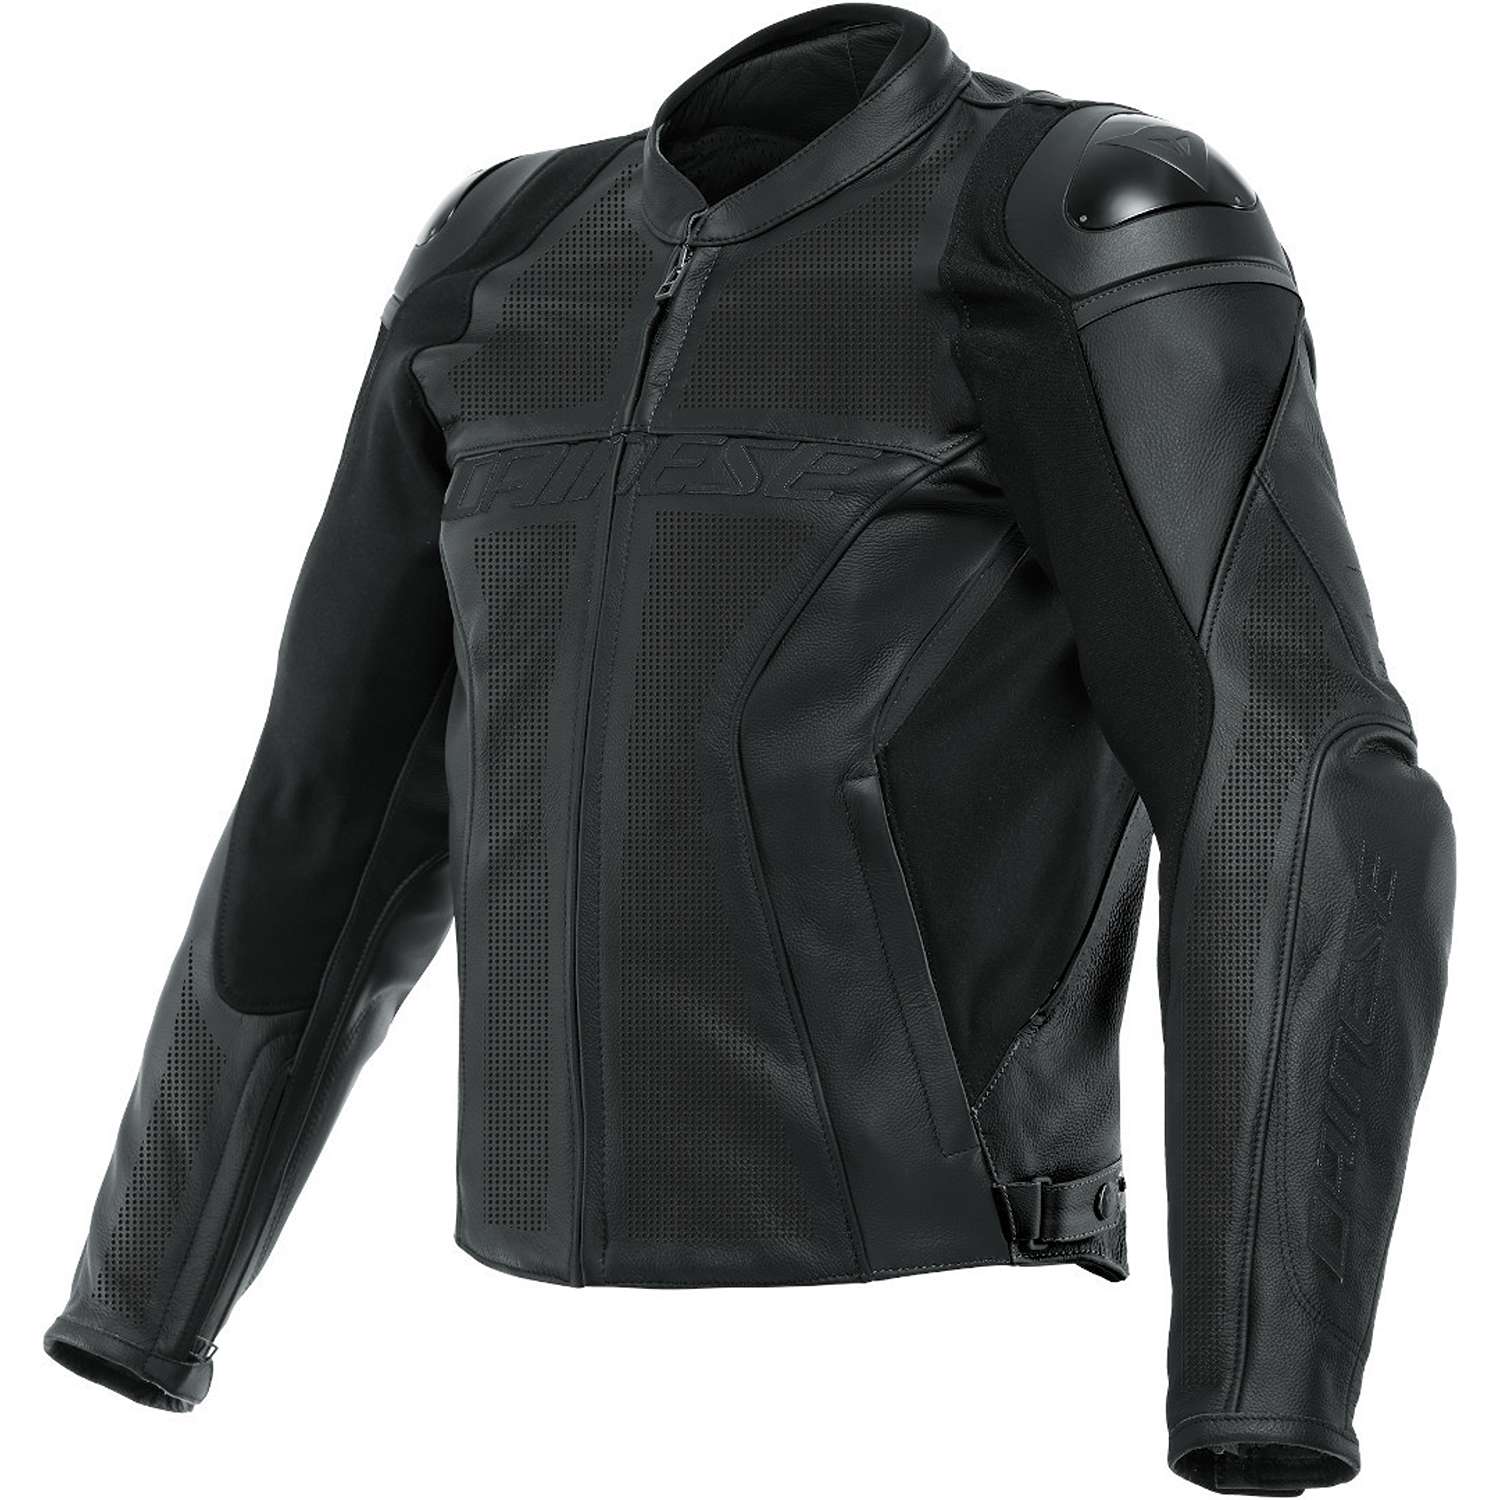 Image of Dainese Racing 4 Leather Jacket Perf Black Size 52 ID 8051019483614